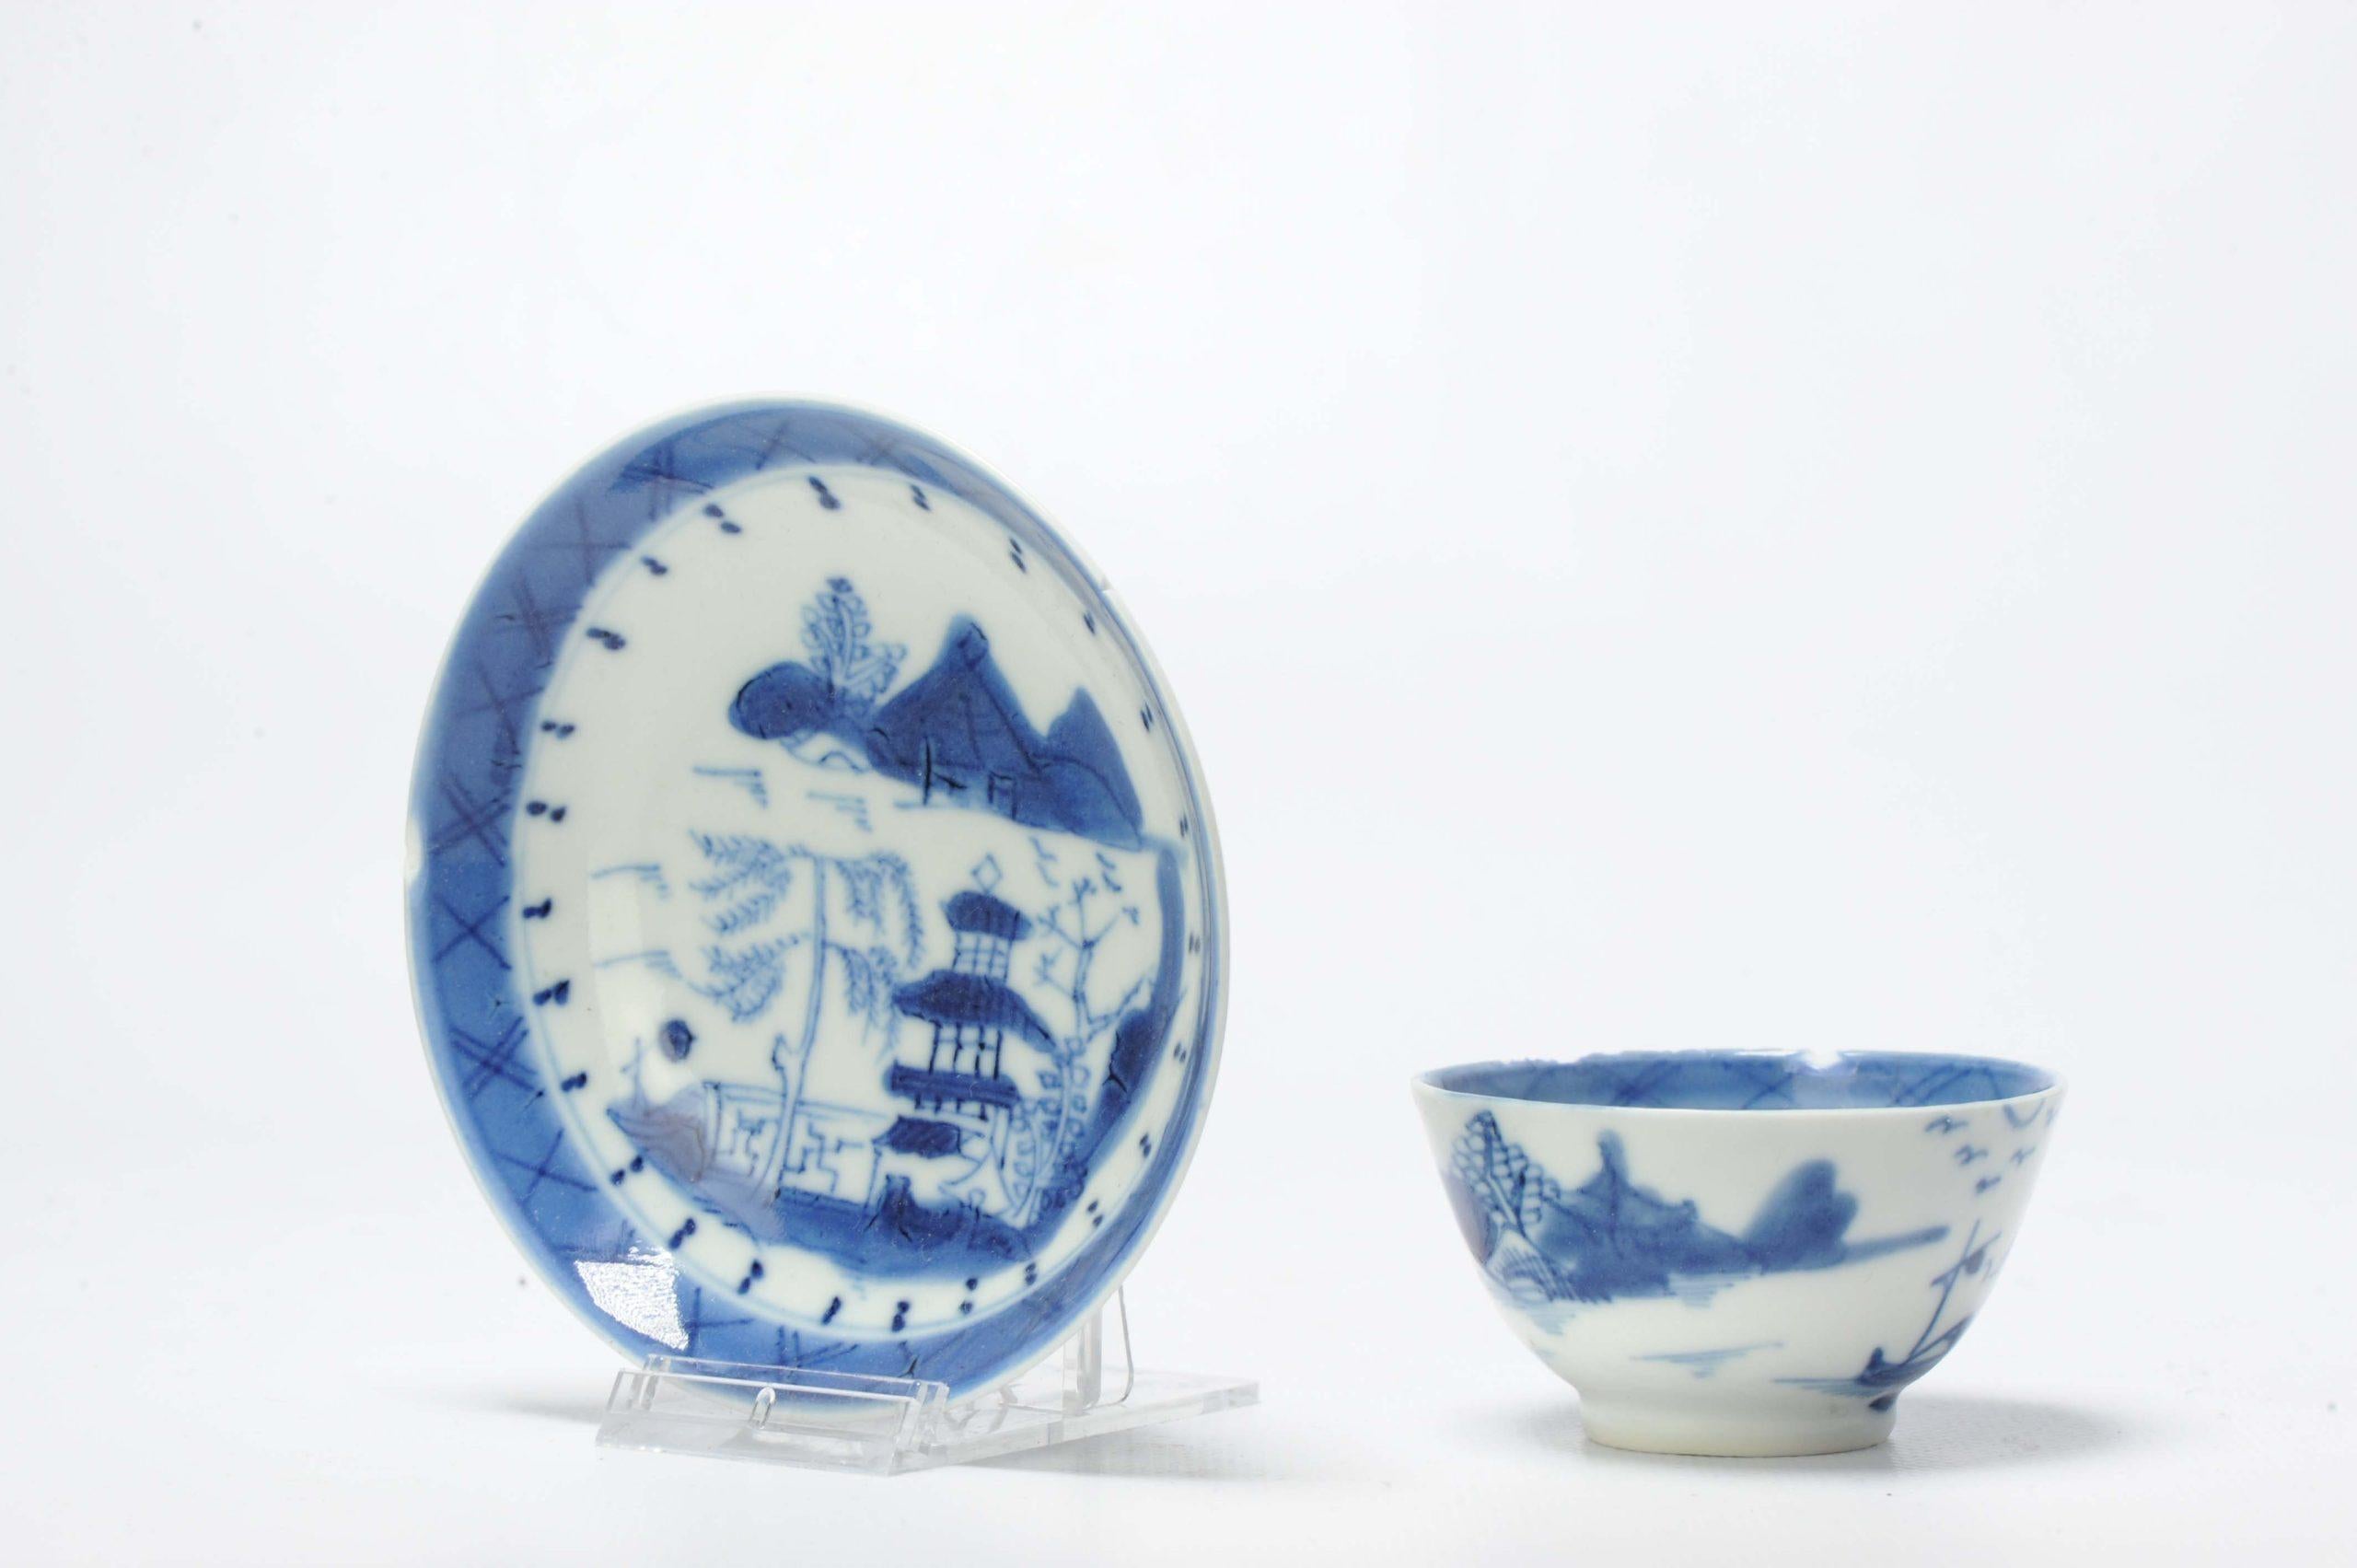 18th century blue and white cup and saucer with a scene of a pagoda in a landscape.

Additional information:
Material: Porcelain & Pottery
Type: Bowls, Tea/Coffee Drinking: Bowls, Cups & Teapots
Region of Origin: China
Period: 18th century Qing